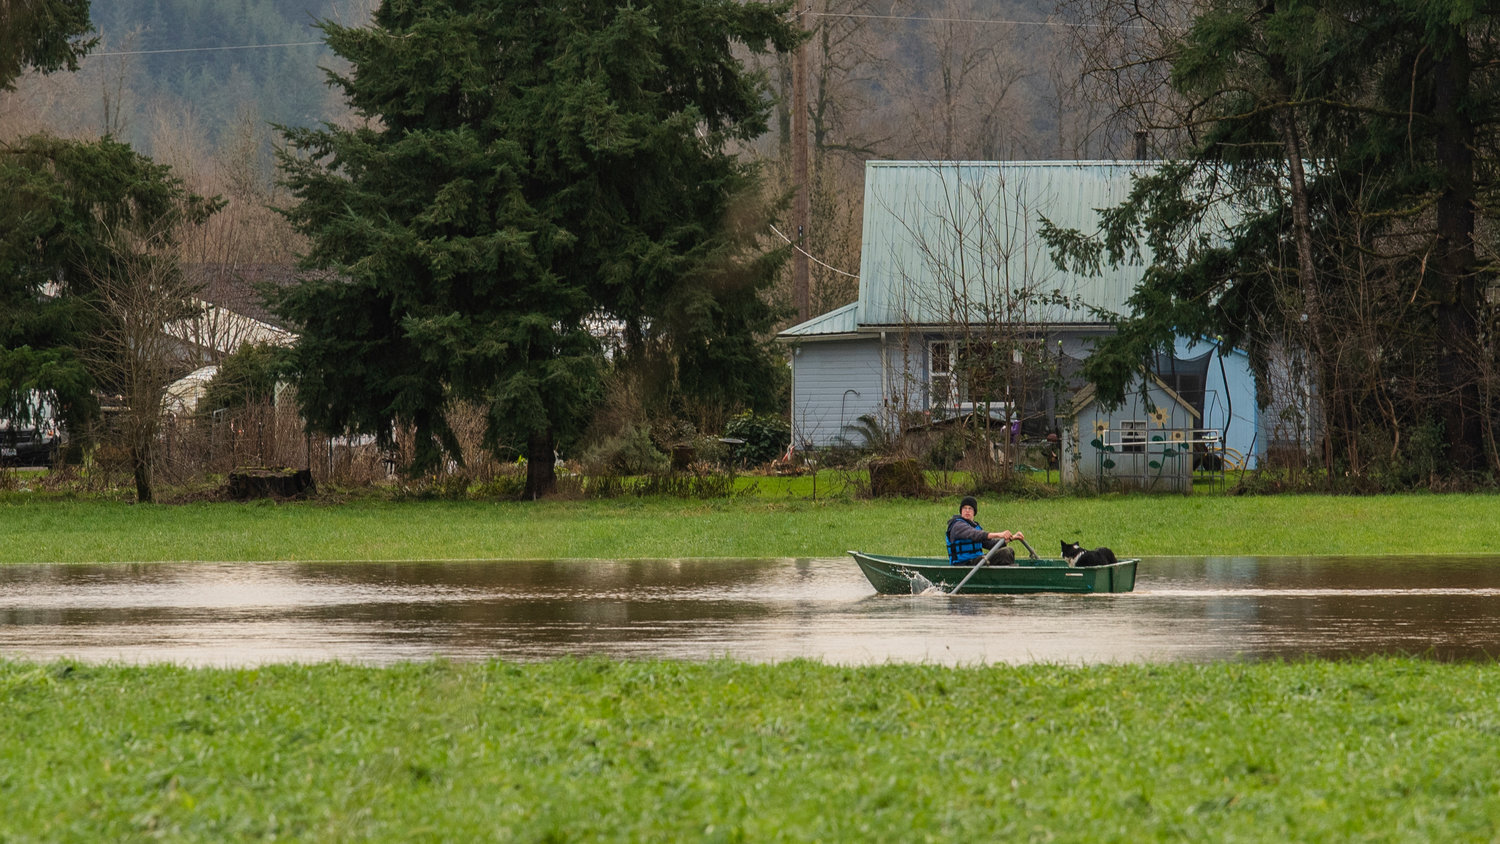 A dog watches from inside a boat as oars propel a vessel and its captain through a flooded field alongside U.S. Highway 12 in Rochester Saturday afternoon.